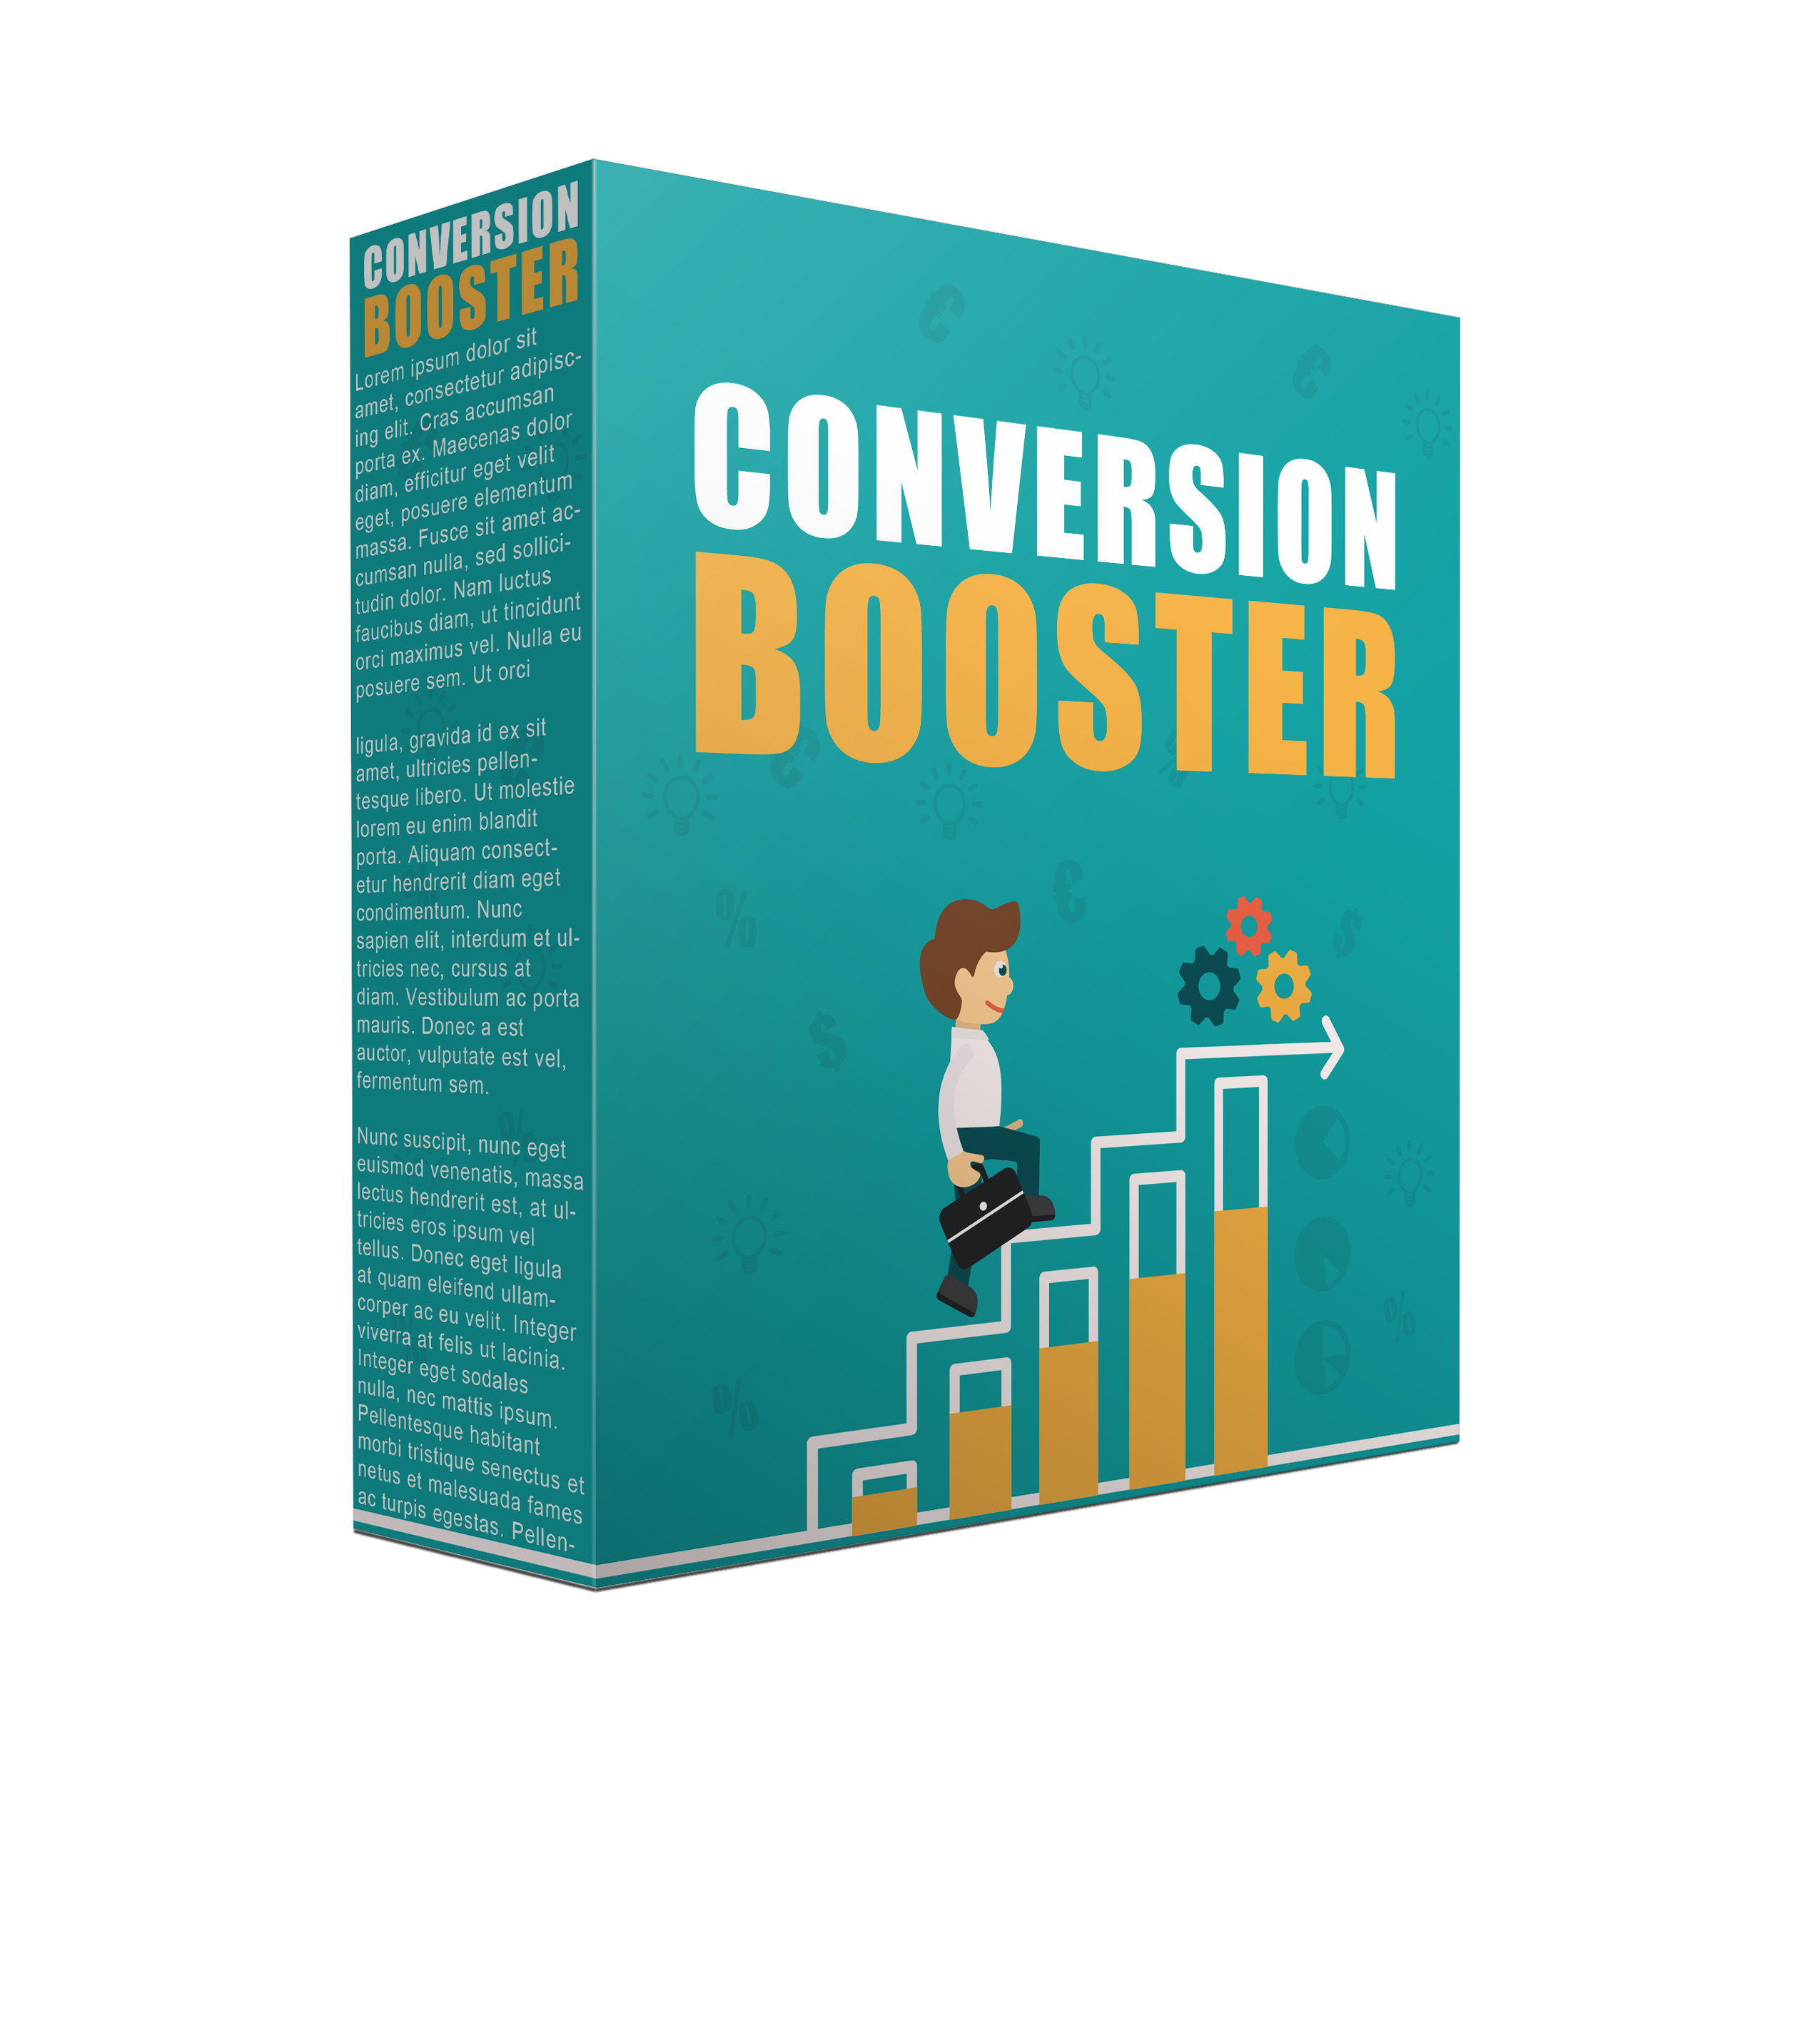 Conversion Booster Video Guide